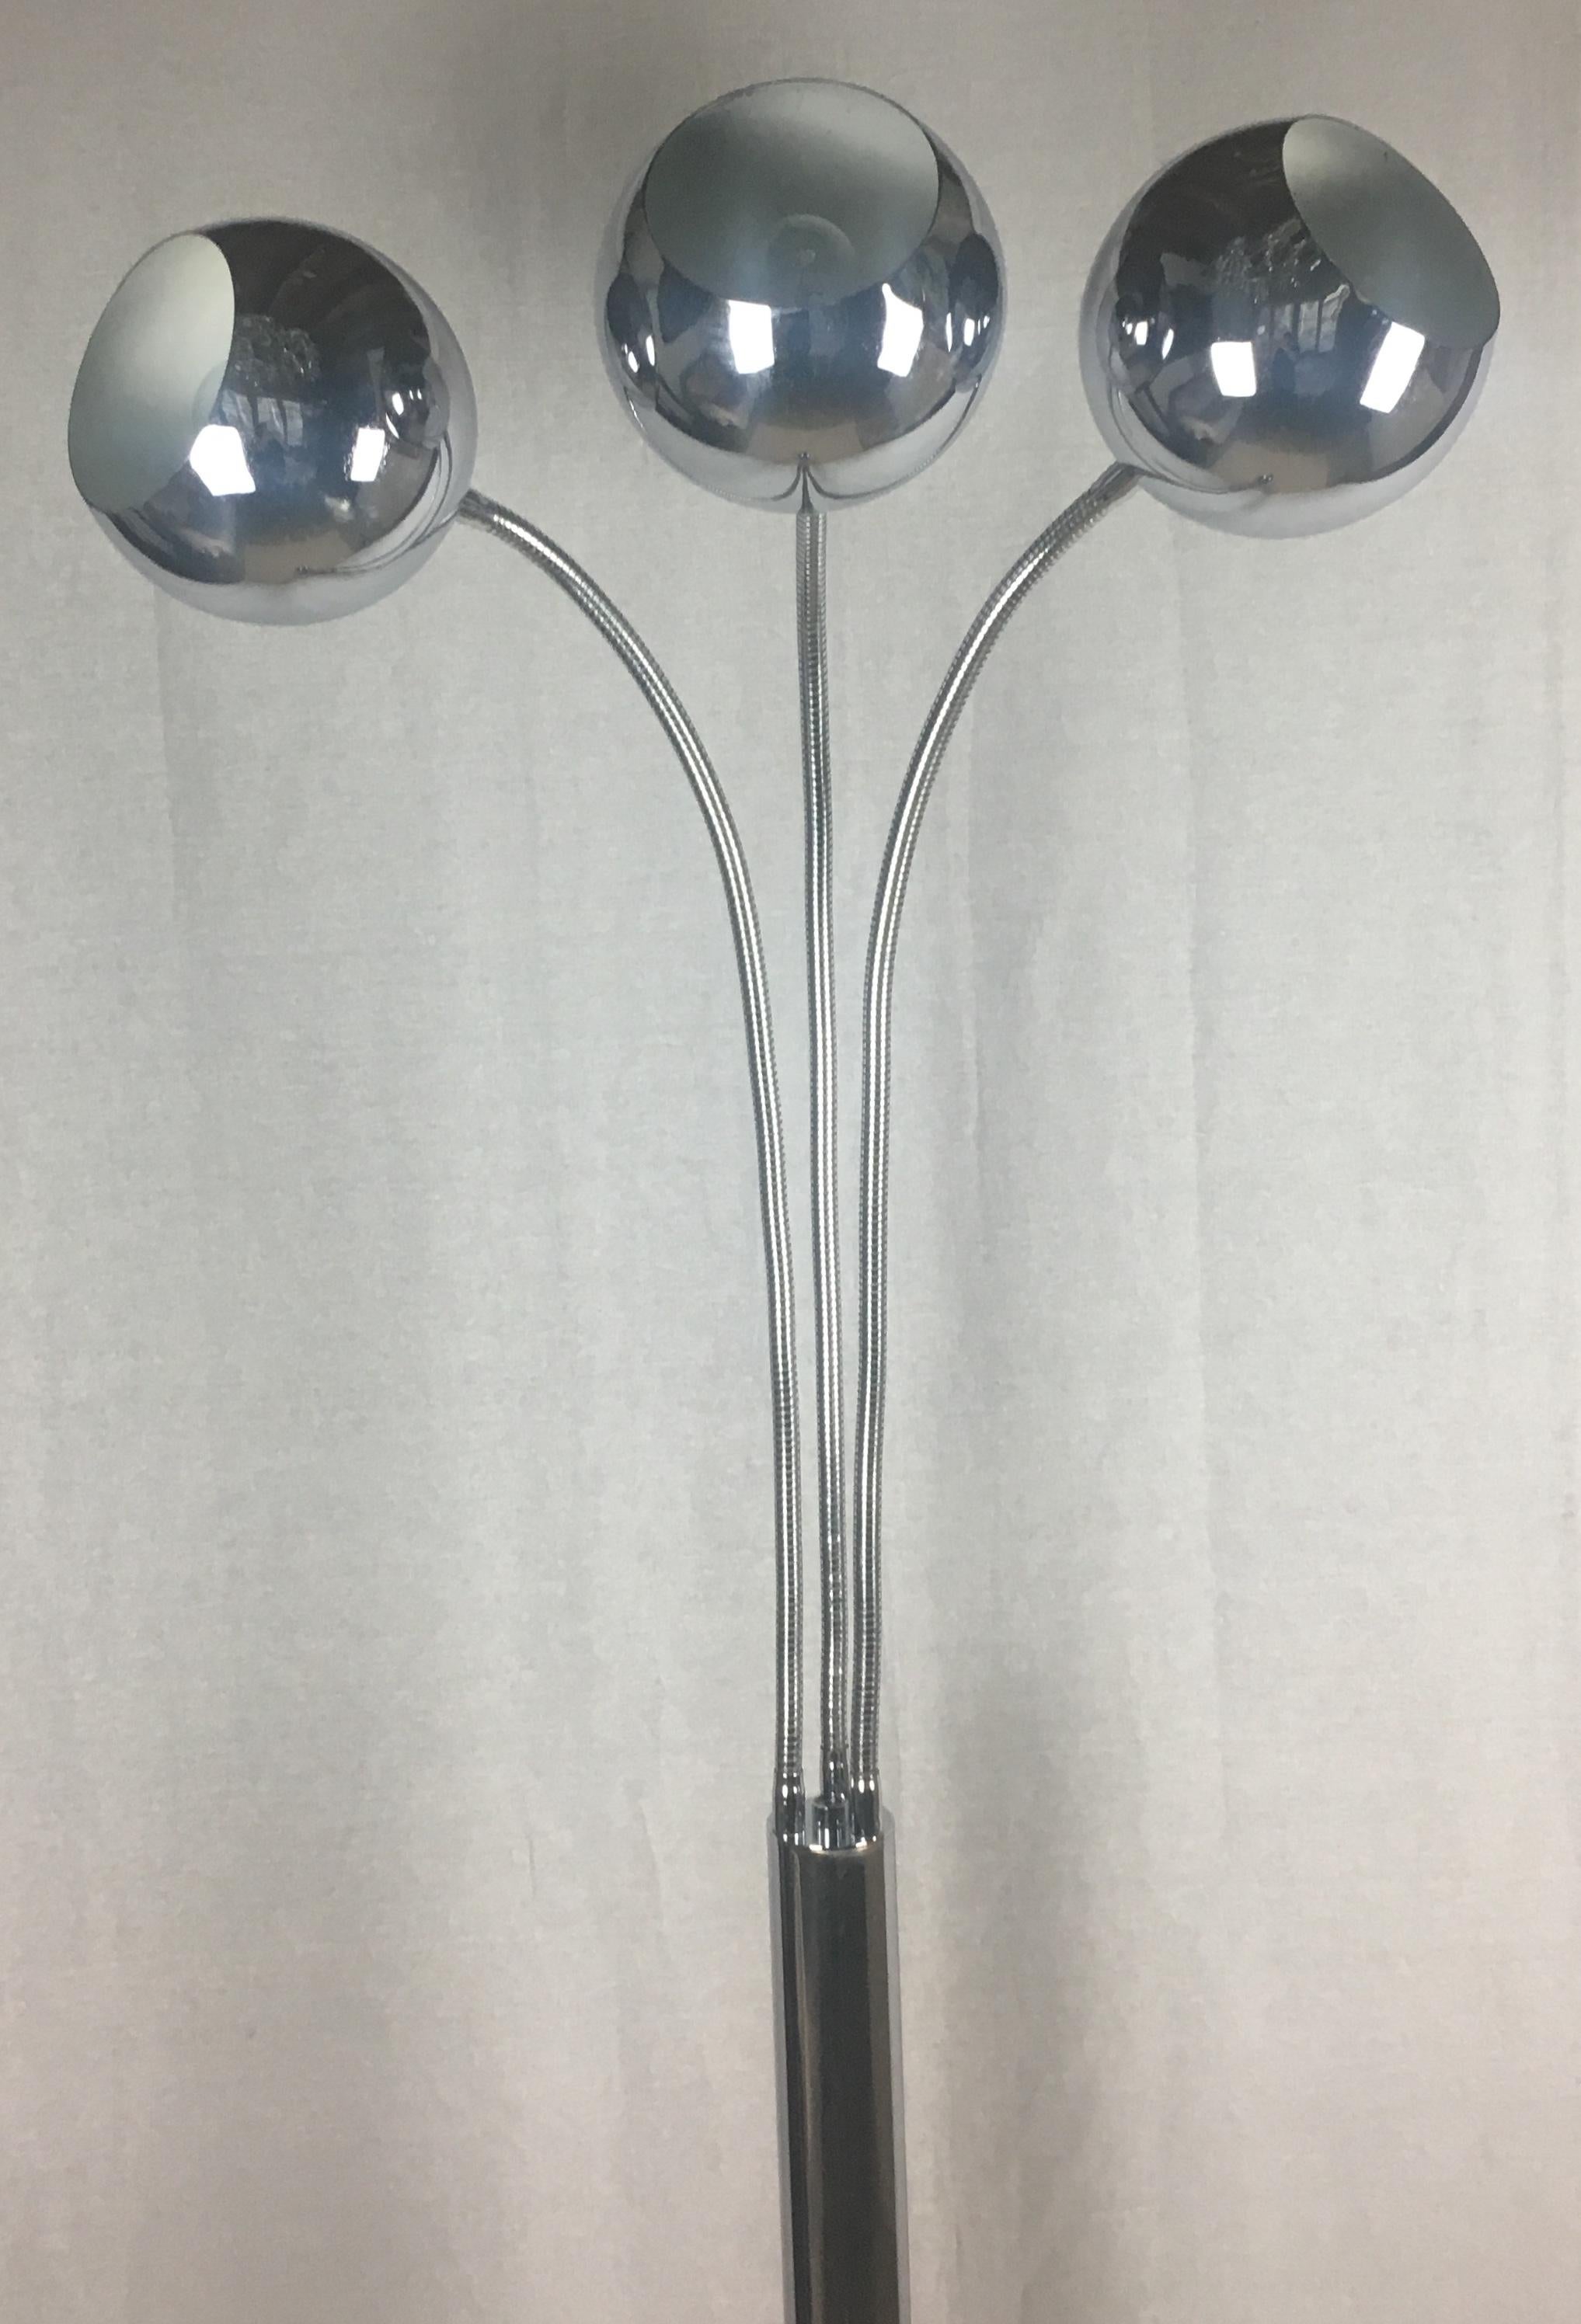 Imposing midcentury arc floor lamp with three chromed arms to enlighten several spots in the surroundings. All three bowls are resolvable and adjustable through hinges. Each bowl has one socket inside. The round base gives a stabile stand.